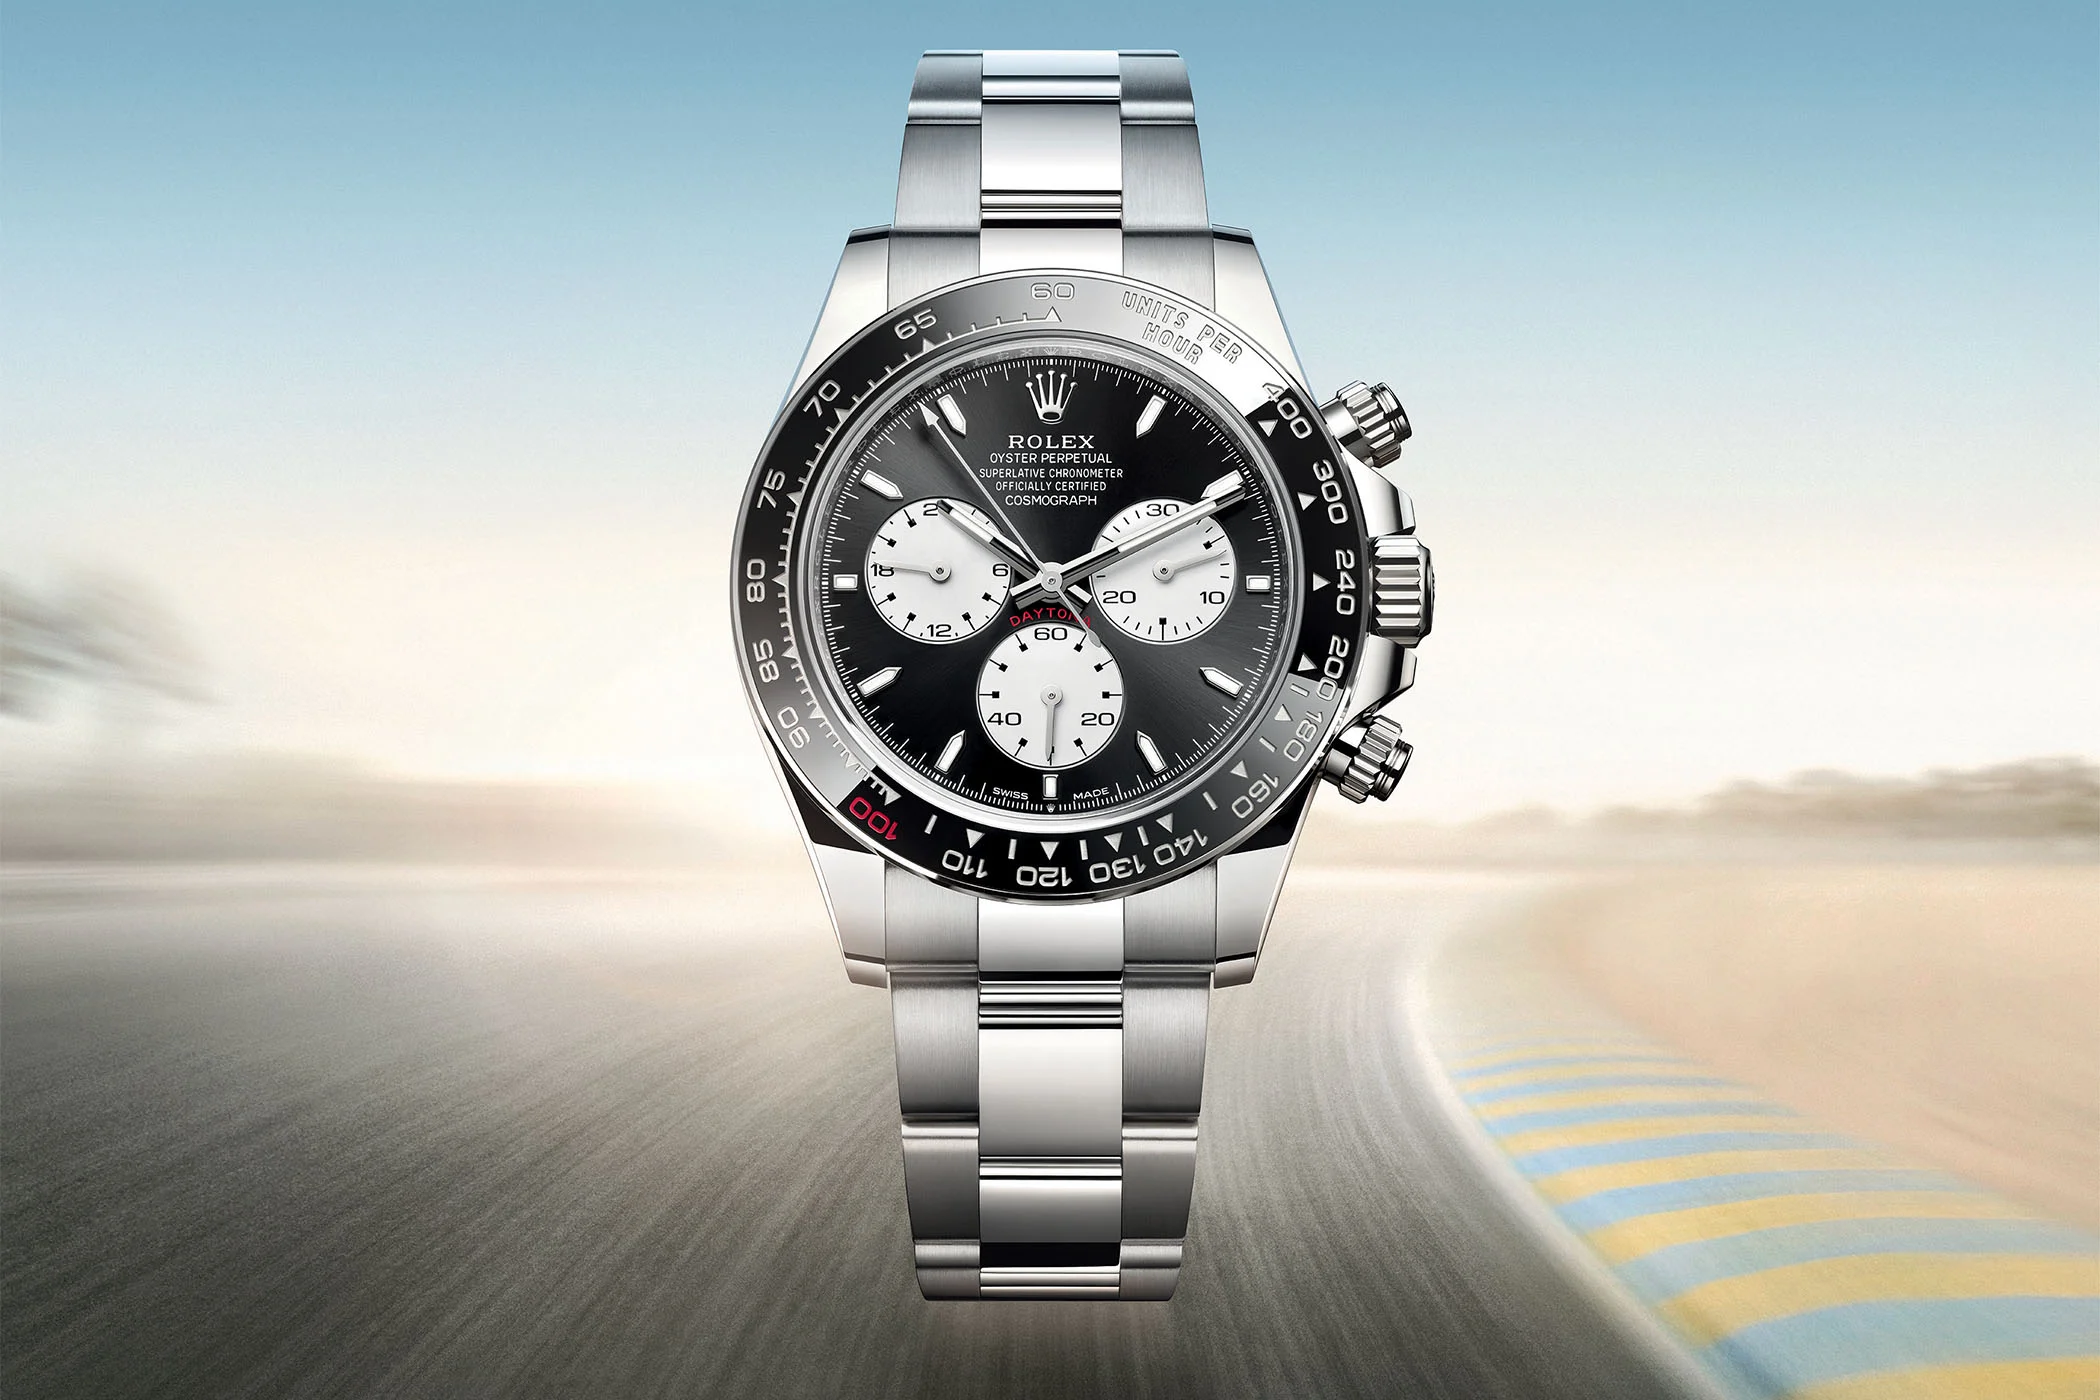 Introducing The Rolex Cosmograph Daytona 126529LN Watch – WristReview.com –  Featuring Watch Reviews, Critiques, Reports & News